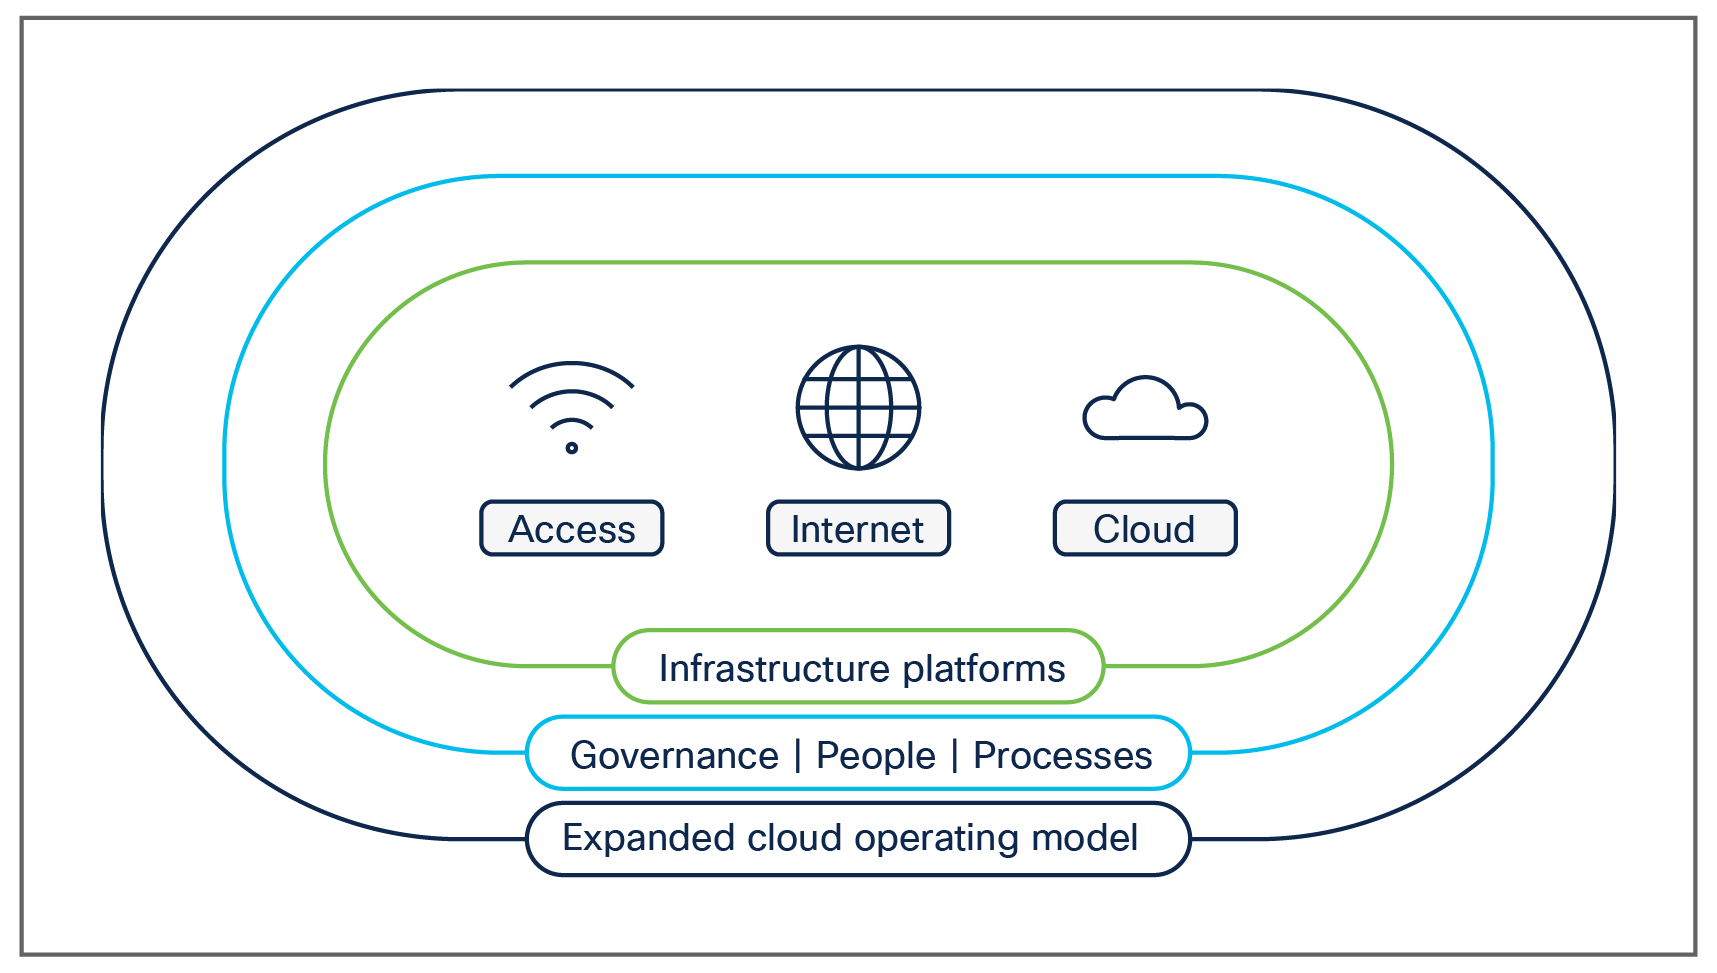 Journey to a cloud operating model